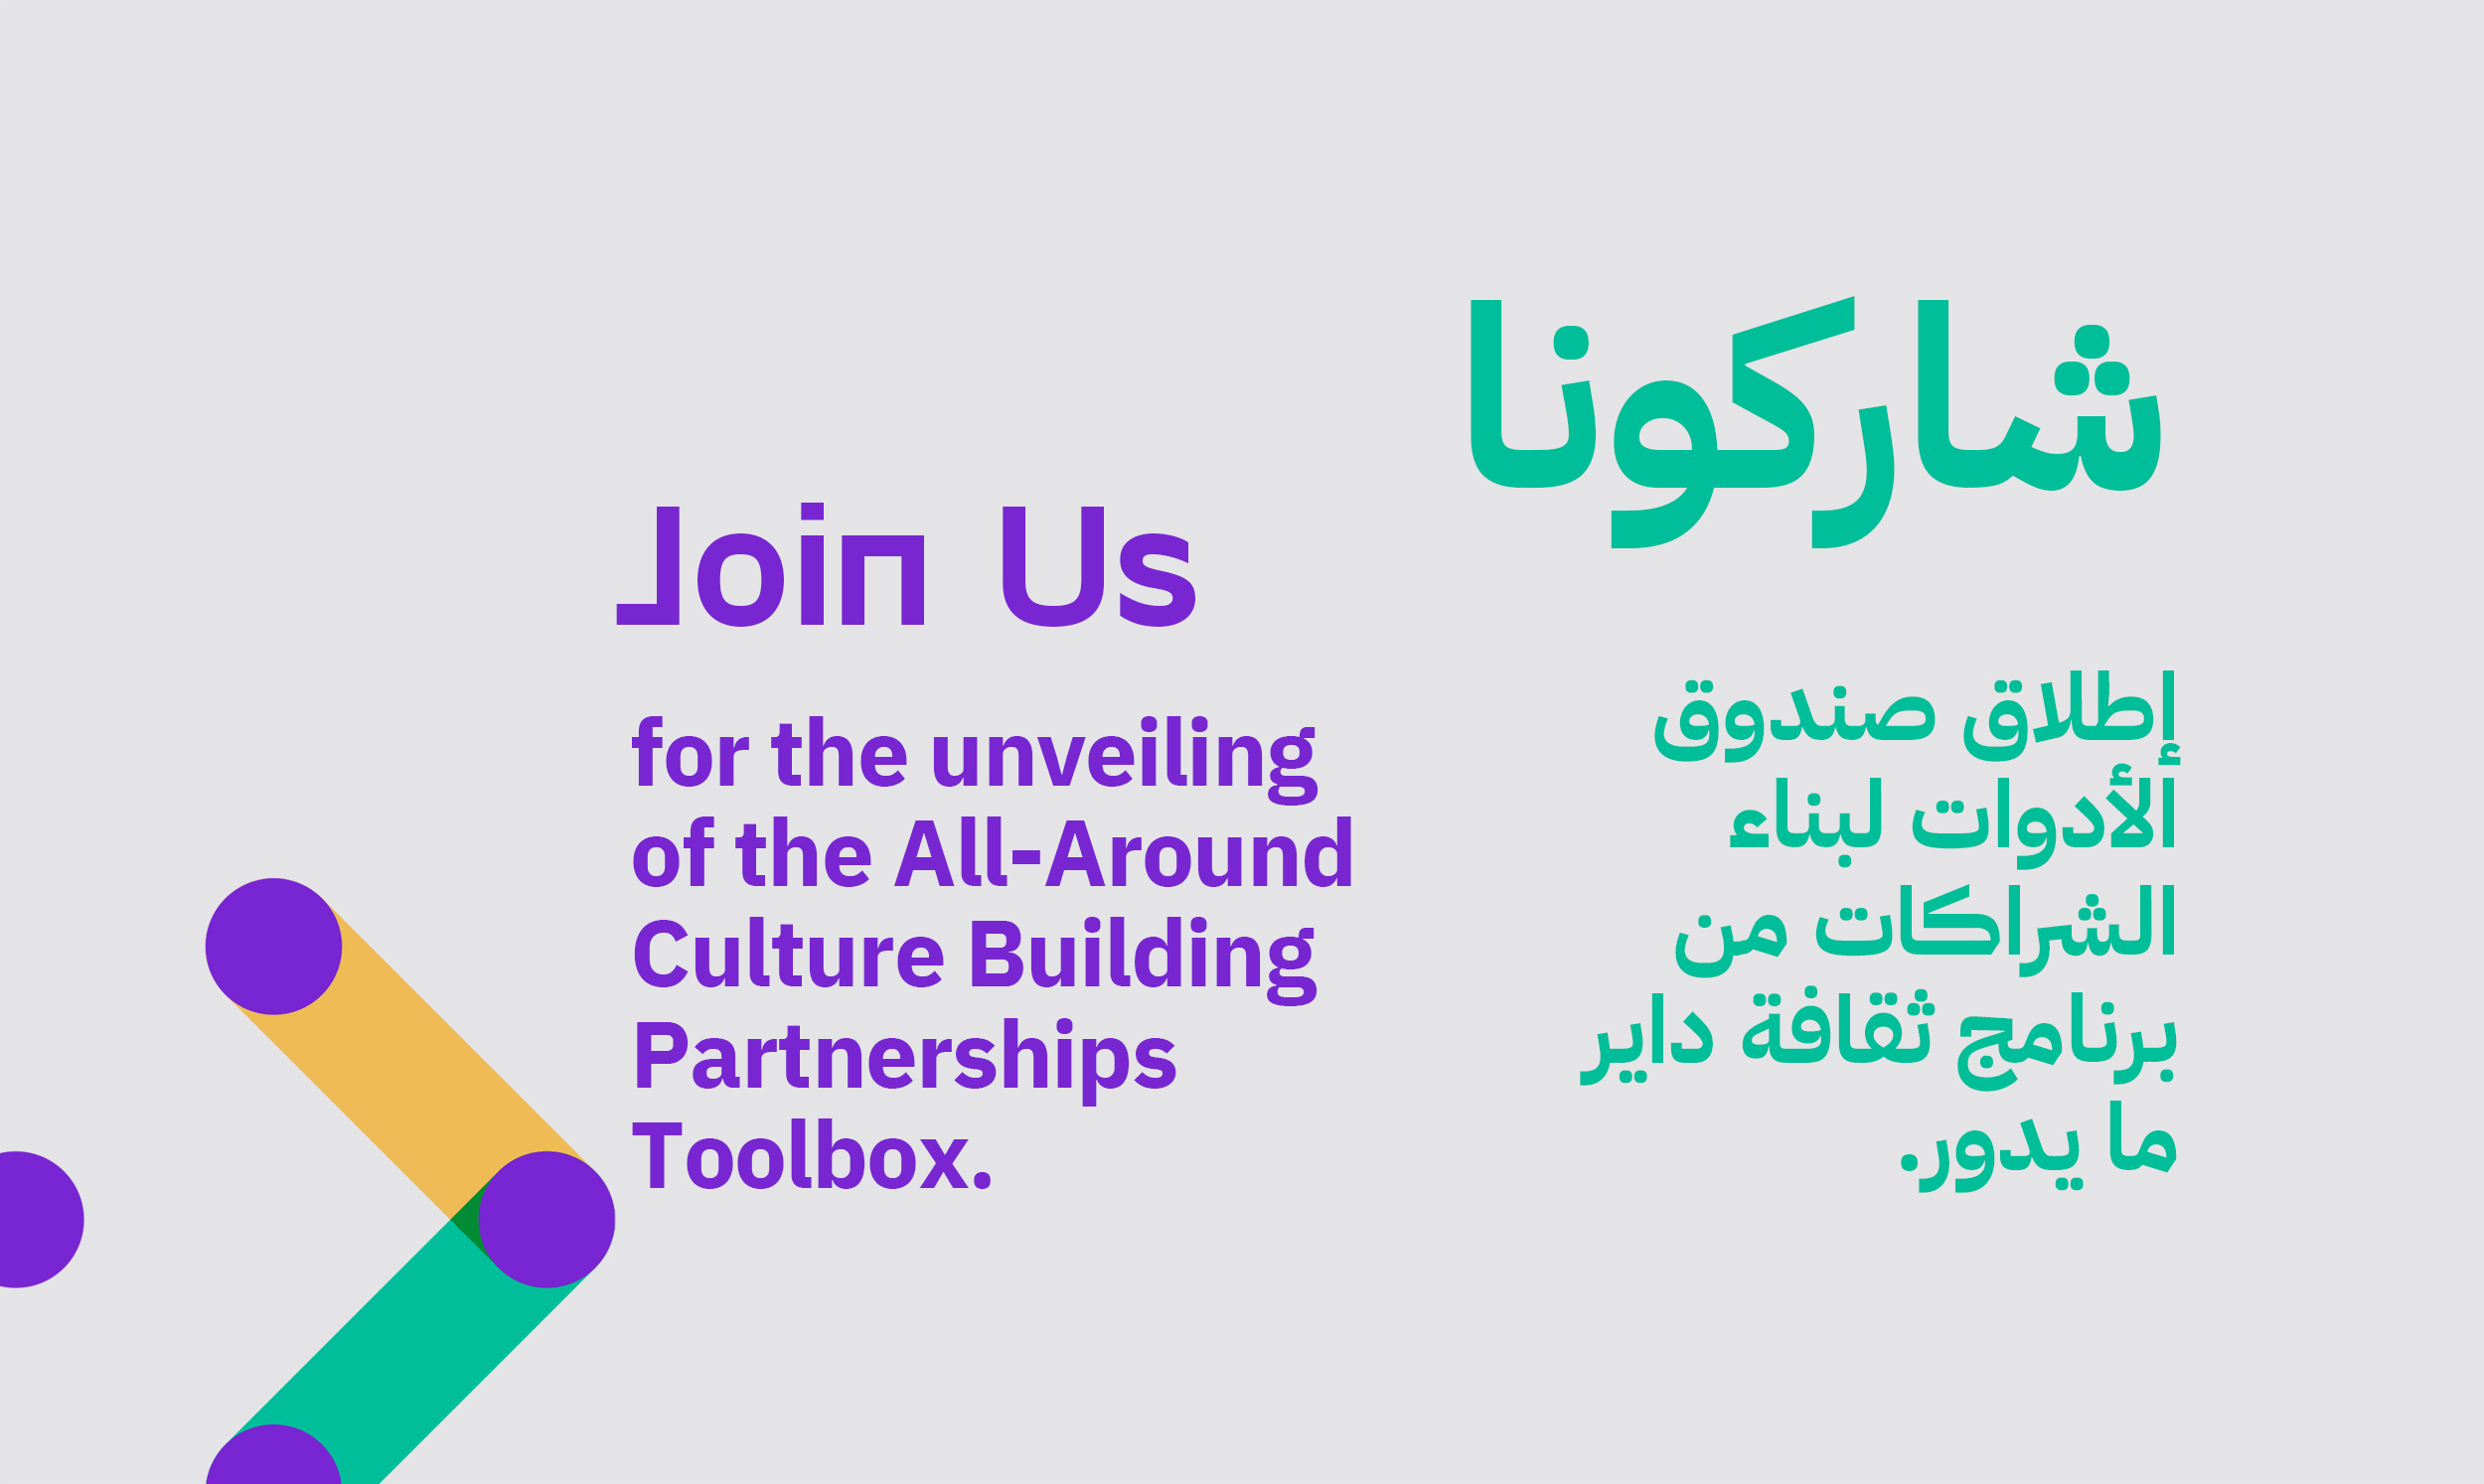  Join us for the unveiling of the All-Around Culture Building Partnerships Toolbox